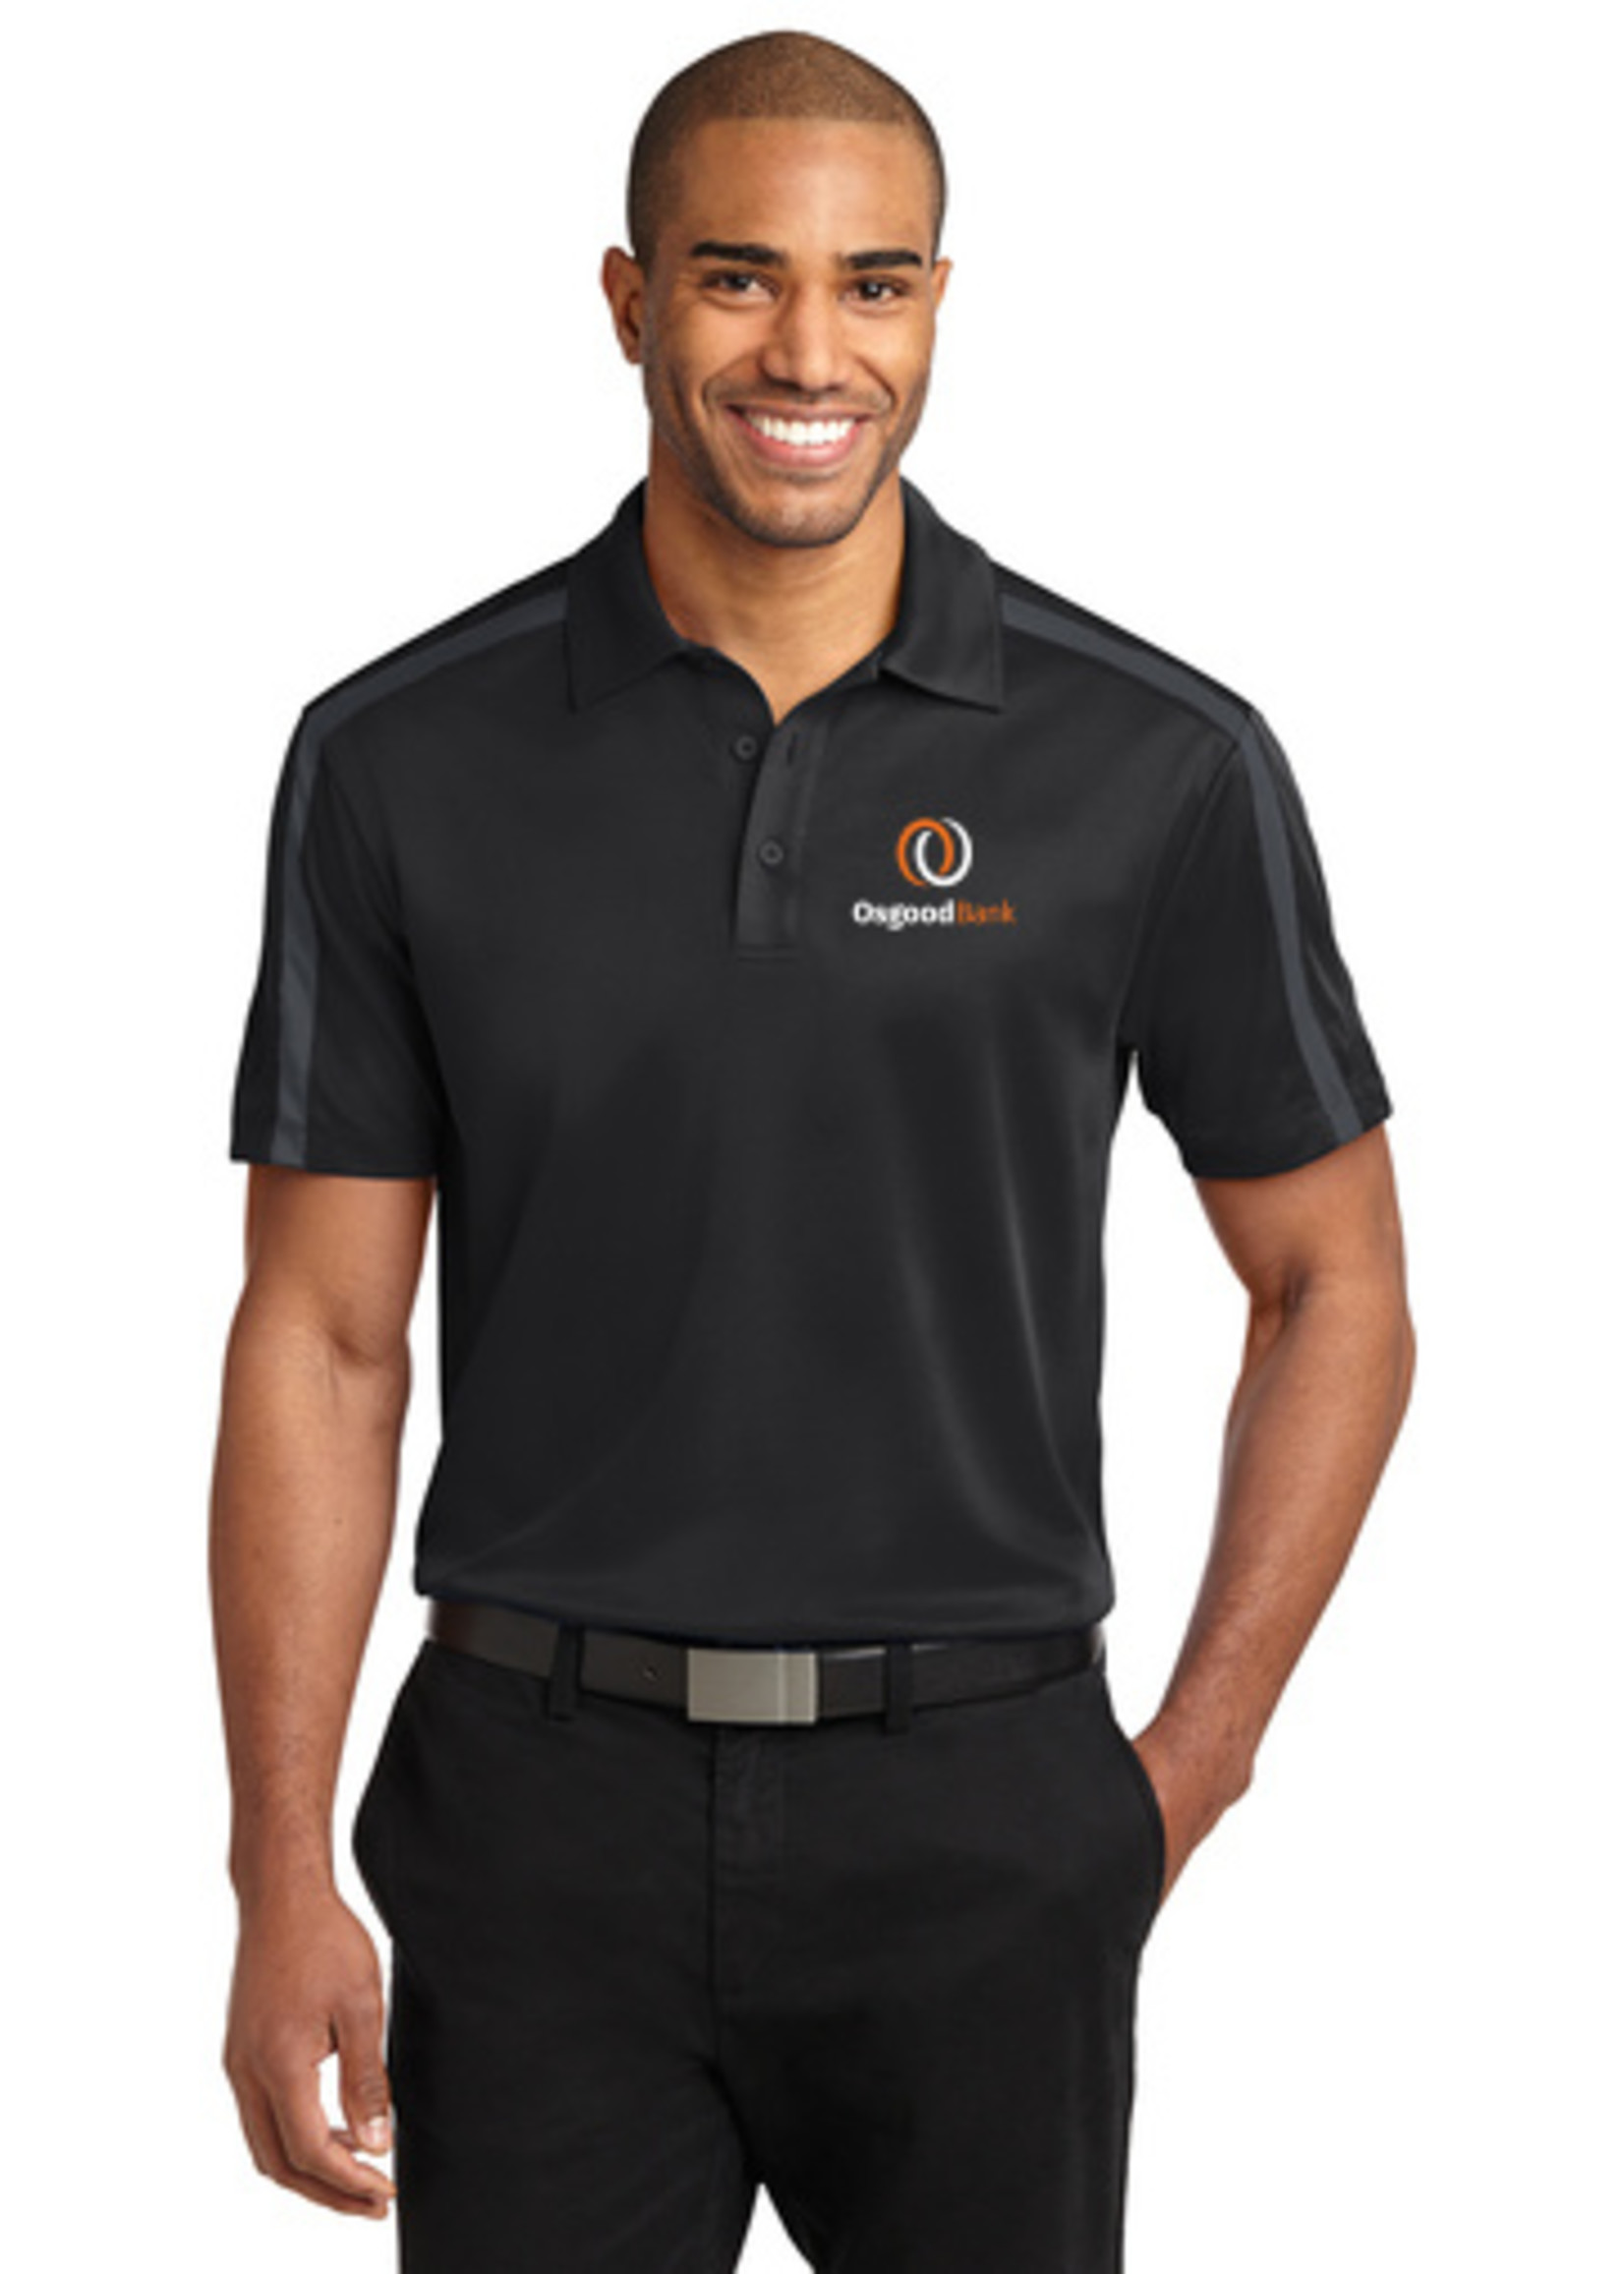 Port Authority OSGOOD BANK Silk Touch Performance Colorblock Stripe Polo K547